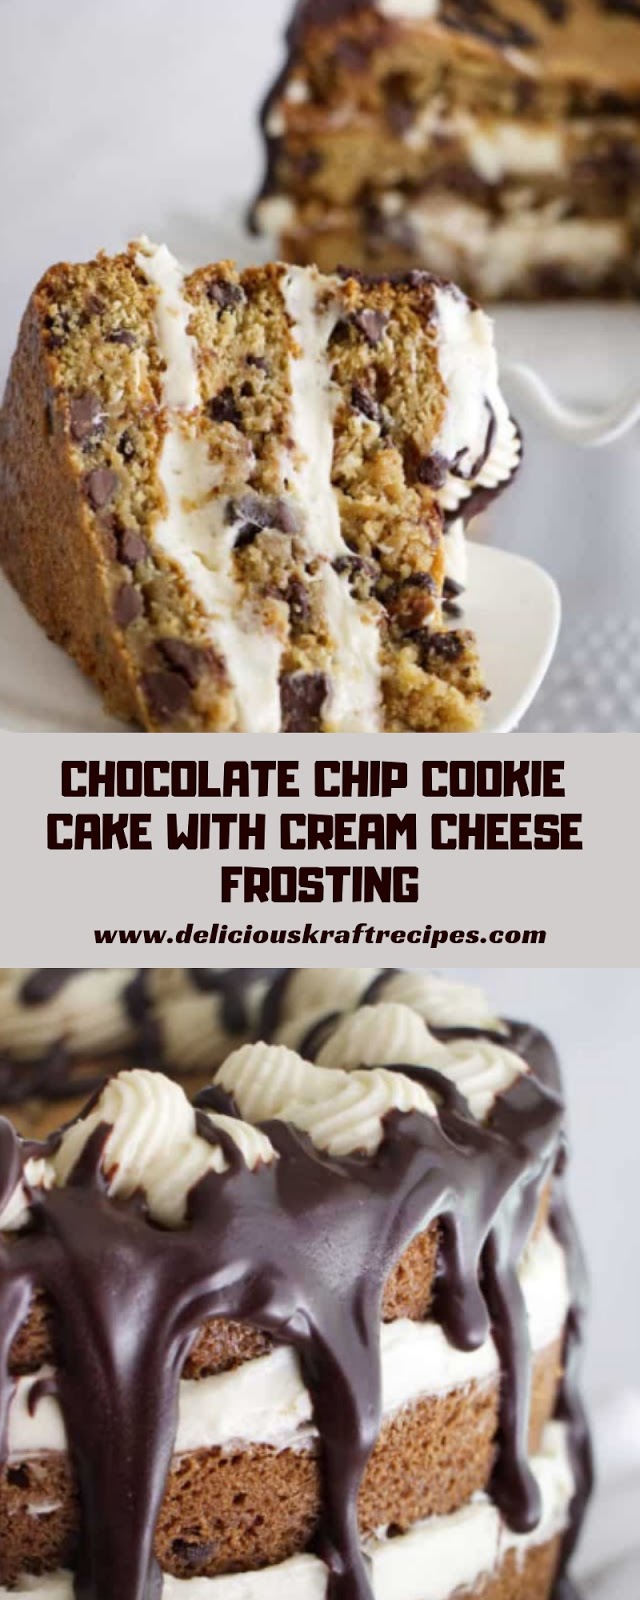 CHOCOLATE CHIP COOKIE CAKE WITH CREAM CHEESE FROSTING